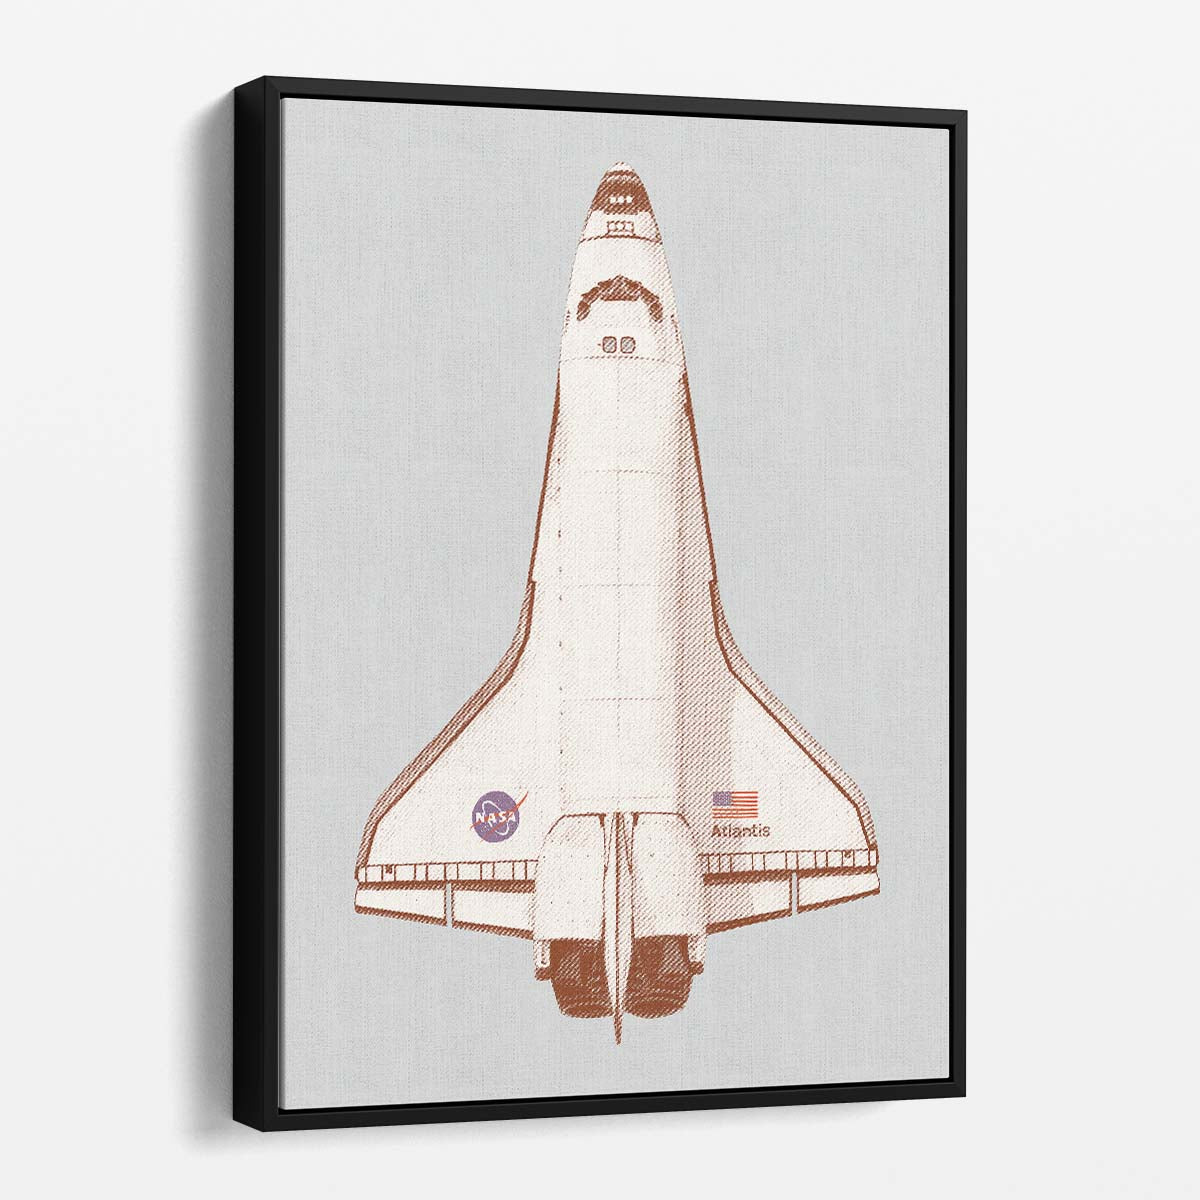 NASA Atlantis Space Shuttle Illustrated Aviation Poster, USA by Luxuriance Designs, made in USA